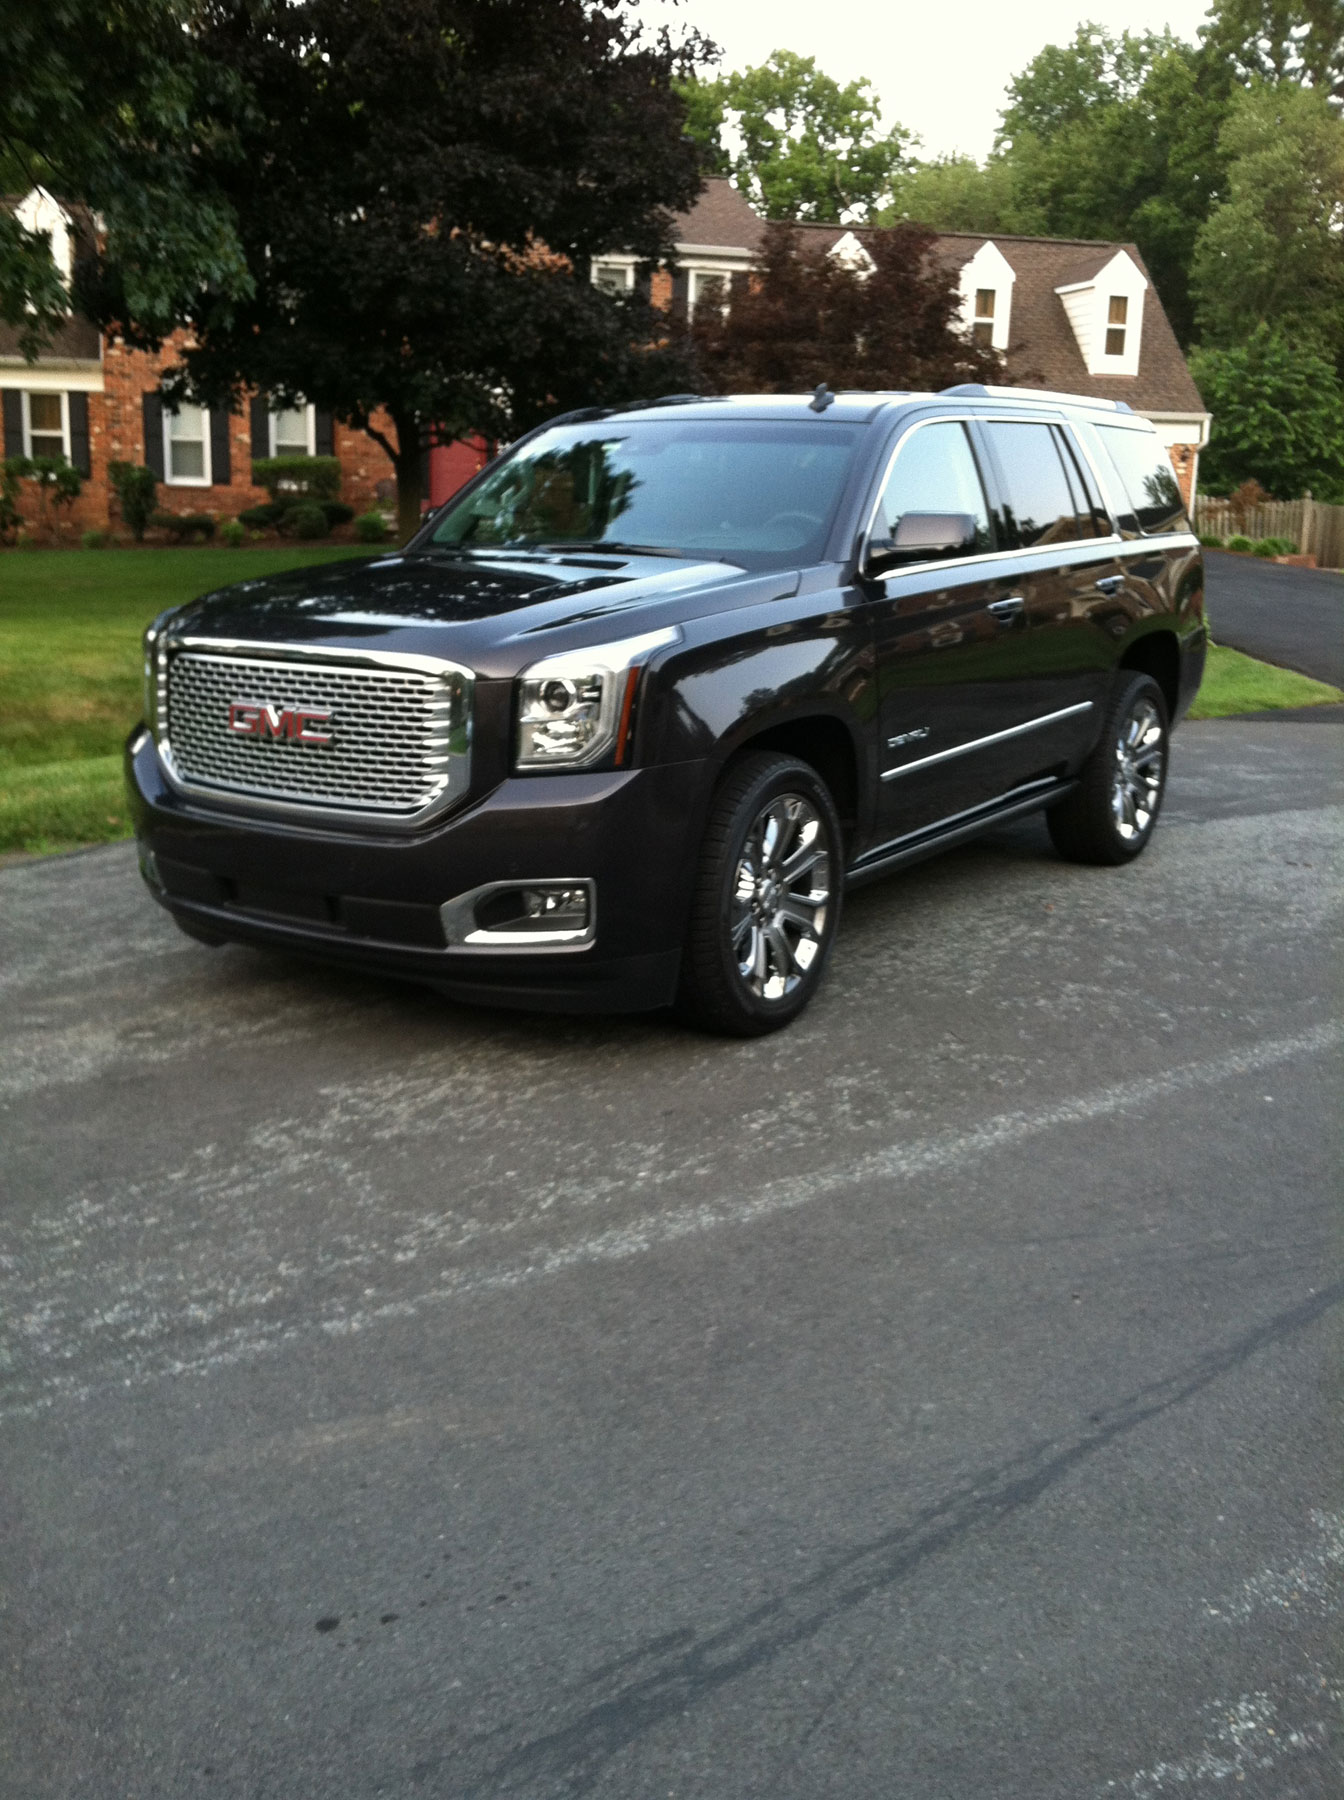 Car Report: 2015 GMC Yukon Denali is still large SUV, now with more polish